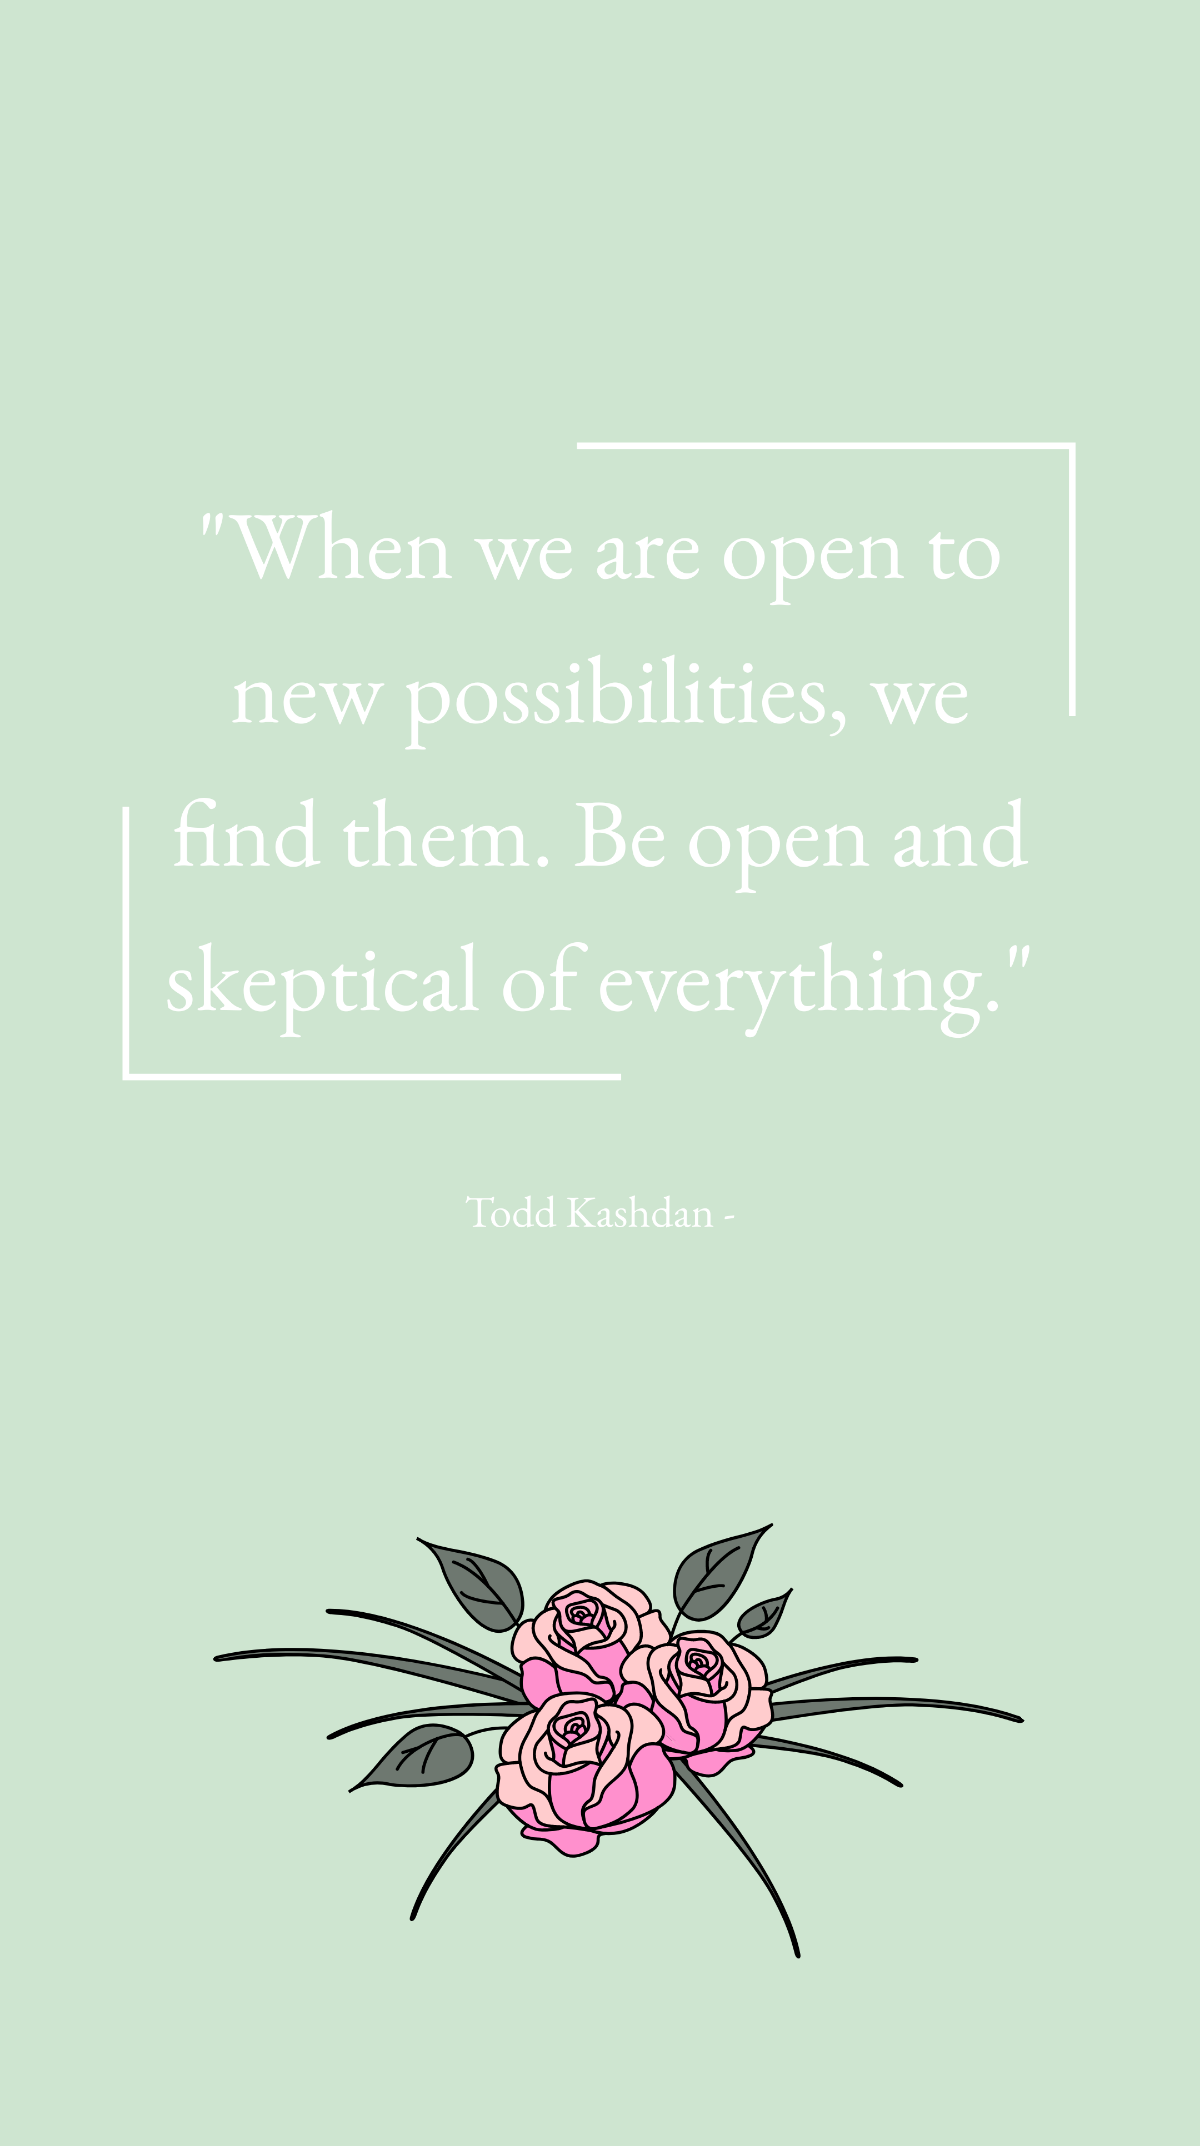 Todd Kashdan - When we are open to new possibilities, we find them. Be open and skeptical of everything. Template